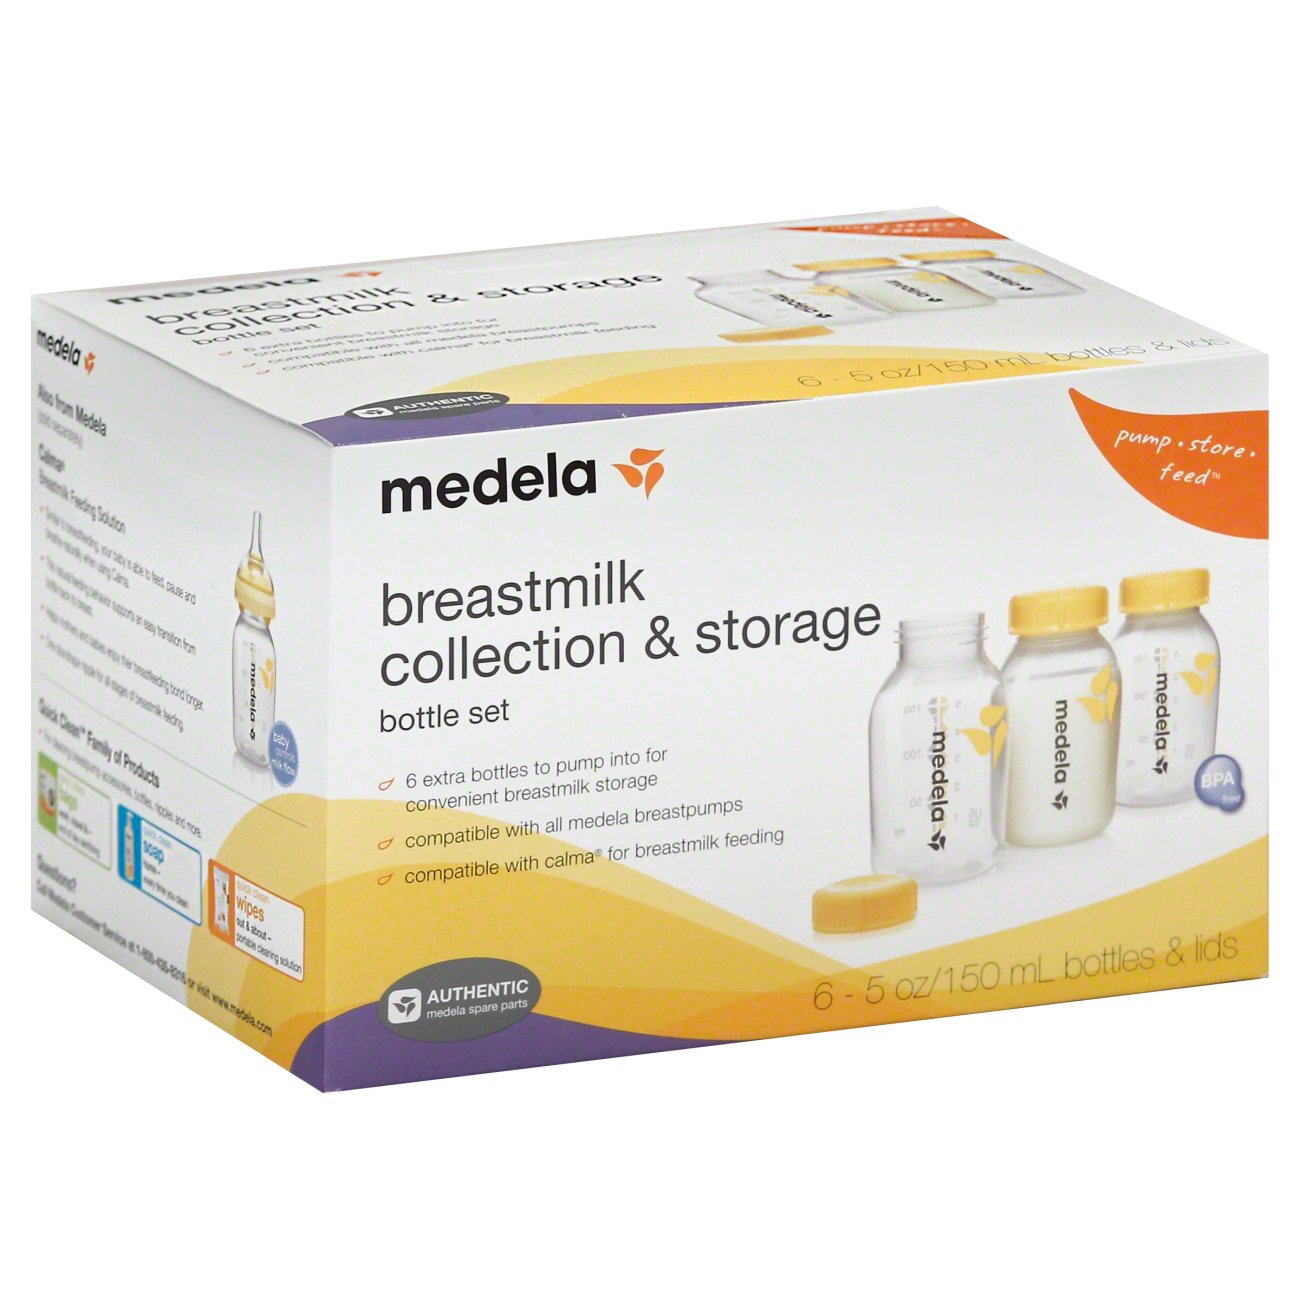  Medela Breast Milk Collection and Storage Bottles, 6 Pack, 5  Ounce Breastmilk Container, Compatible with Medela Breast Pumps and Made  Without BPA : Baby